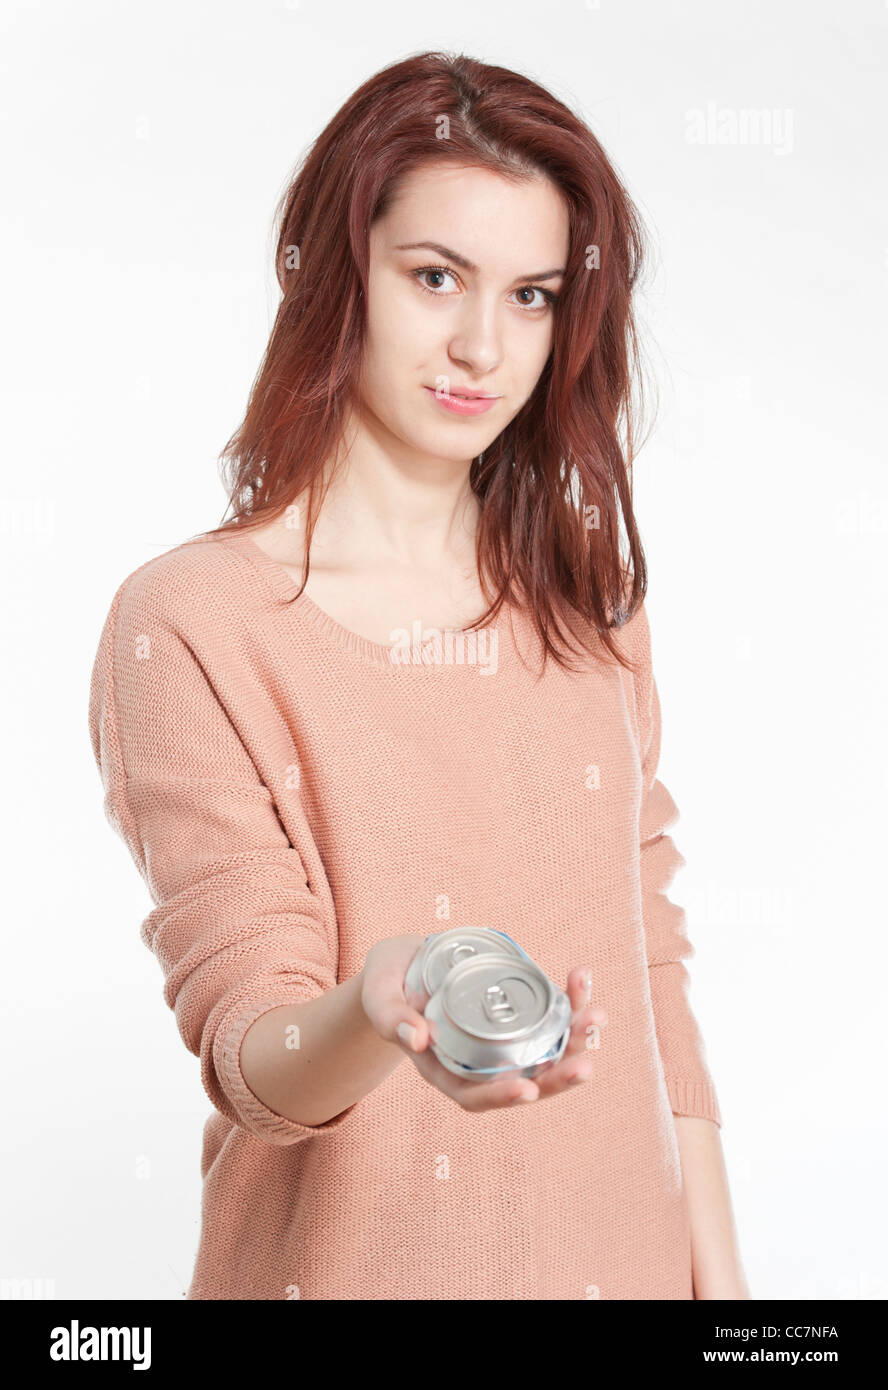 Young woman holding crushed drink cans Stock Photo